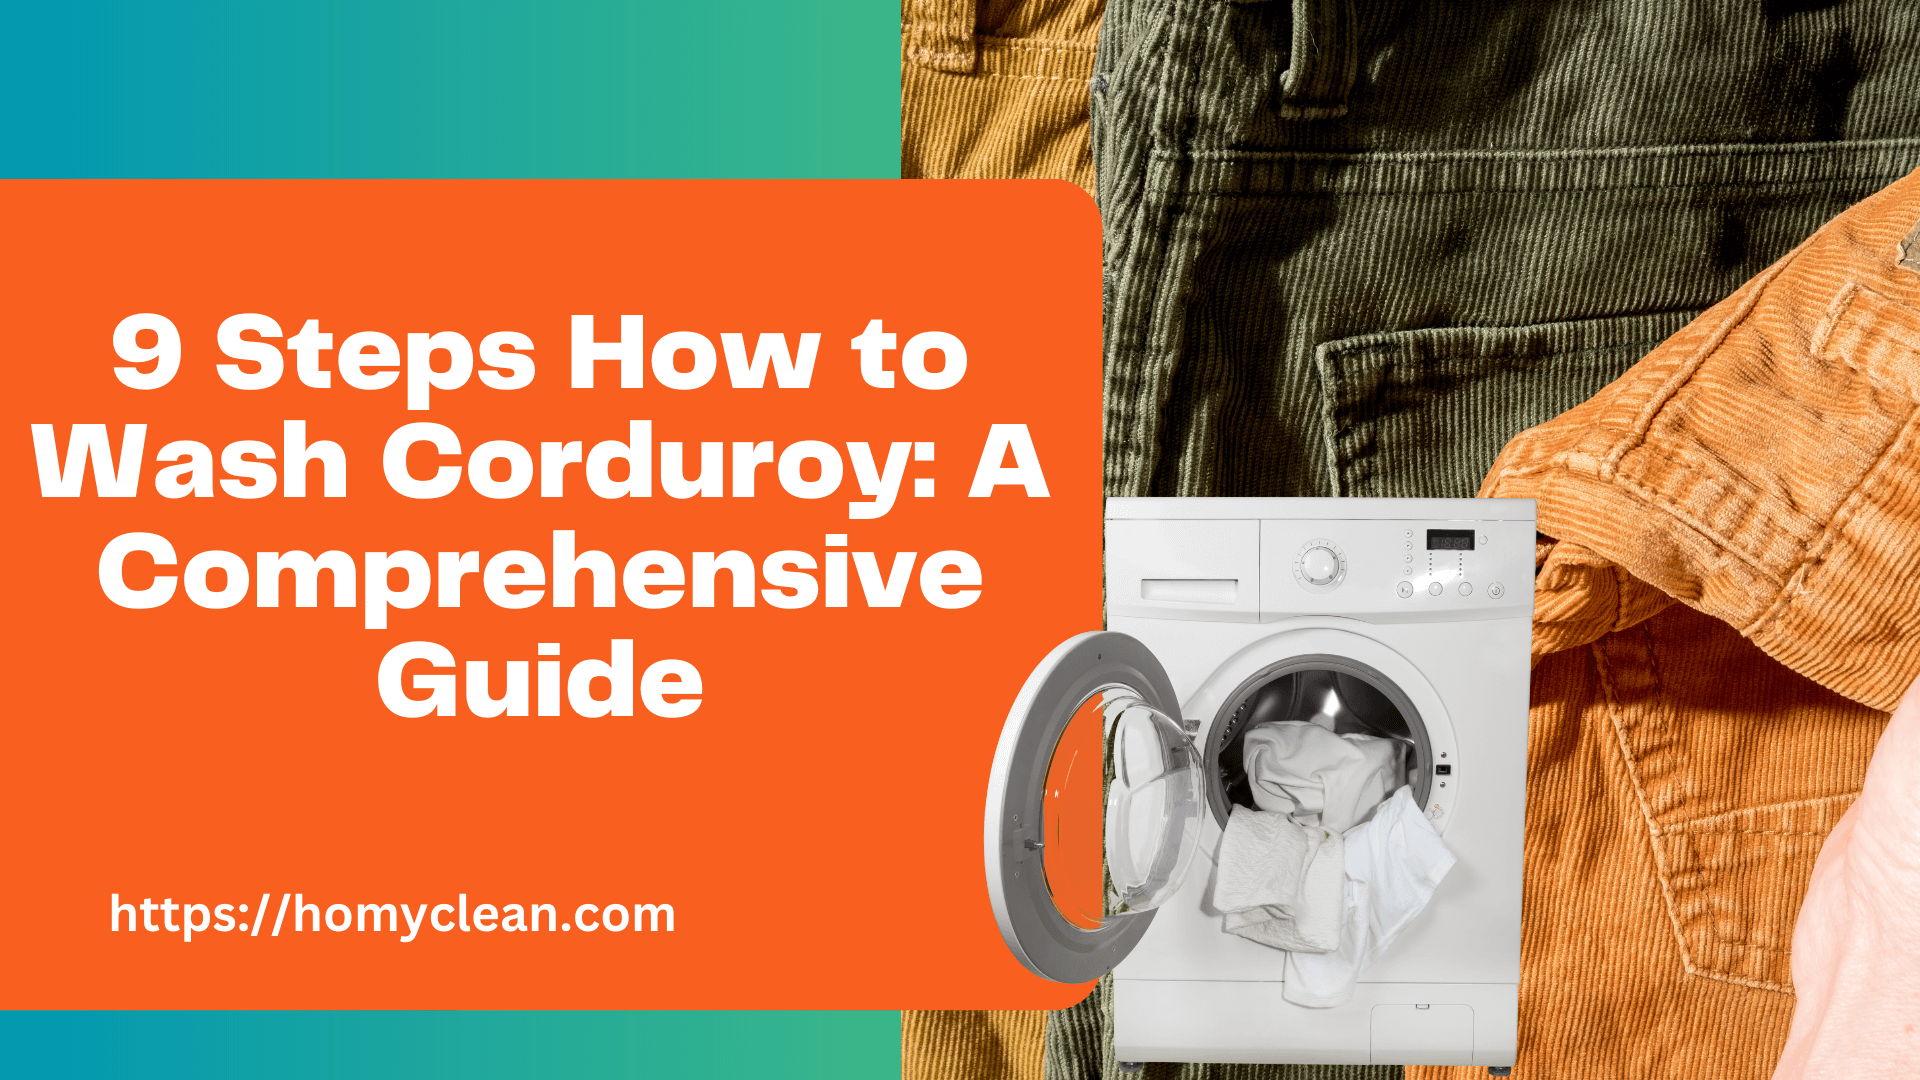 4 Steps How to Wash Corduroy: A Comprehensive Guide